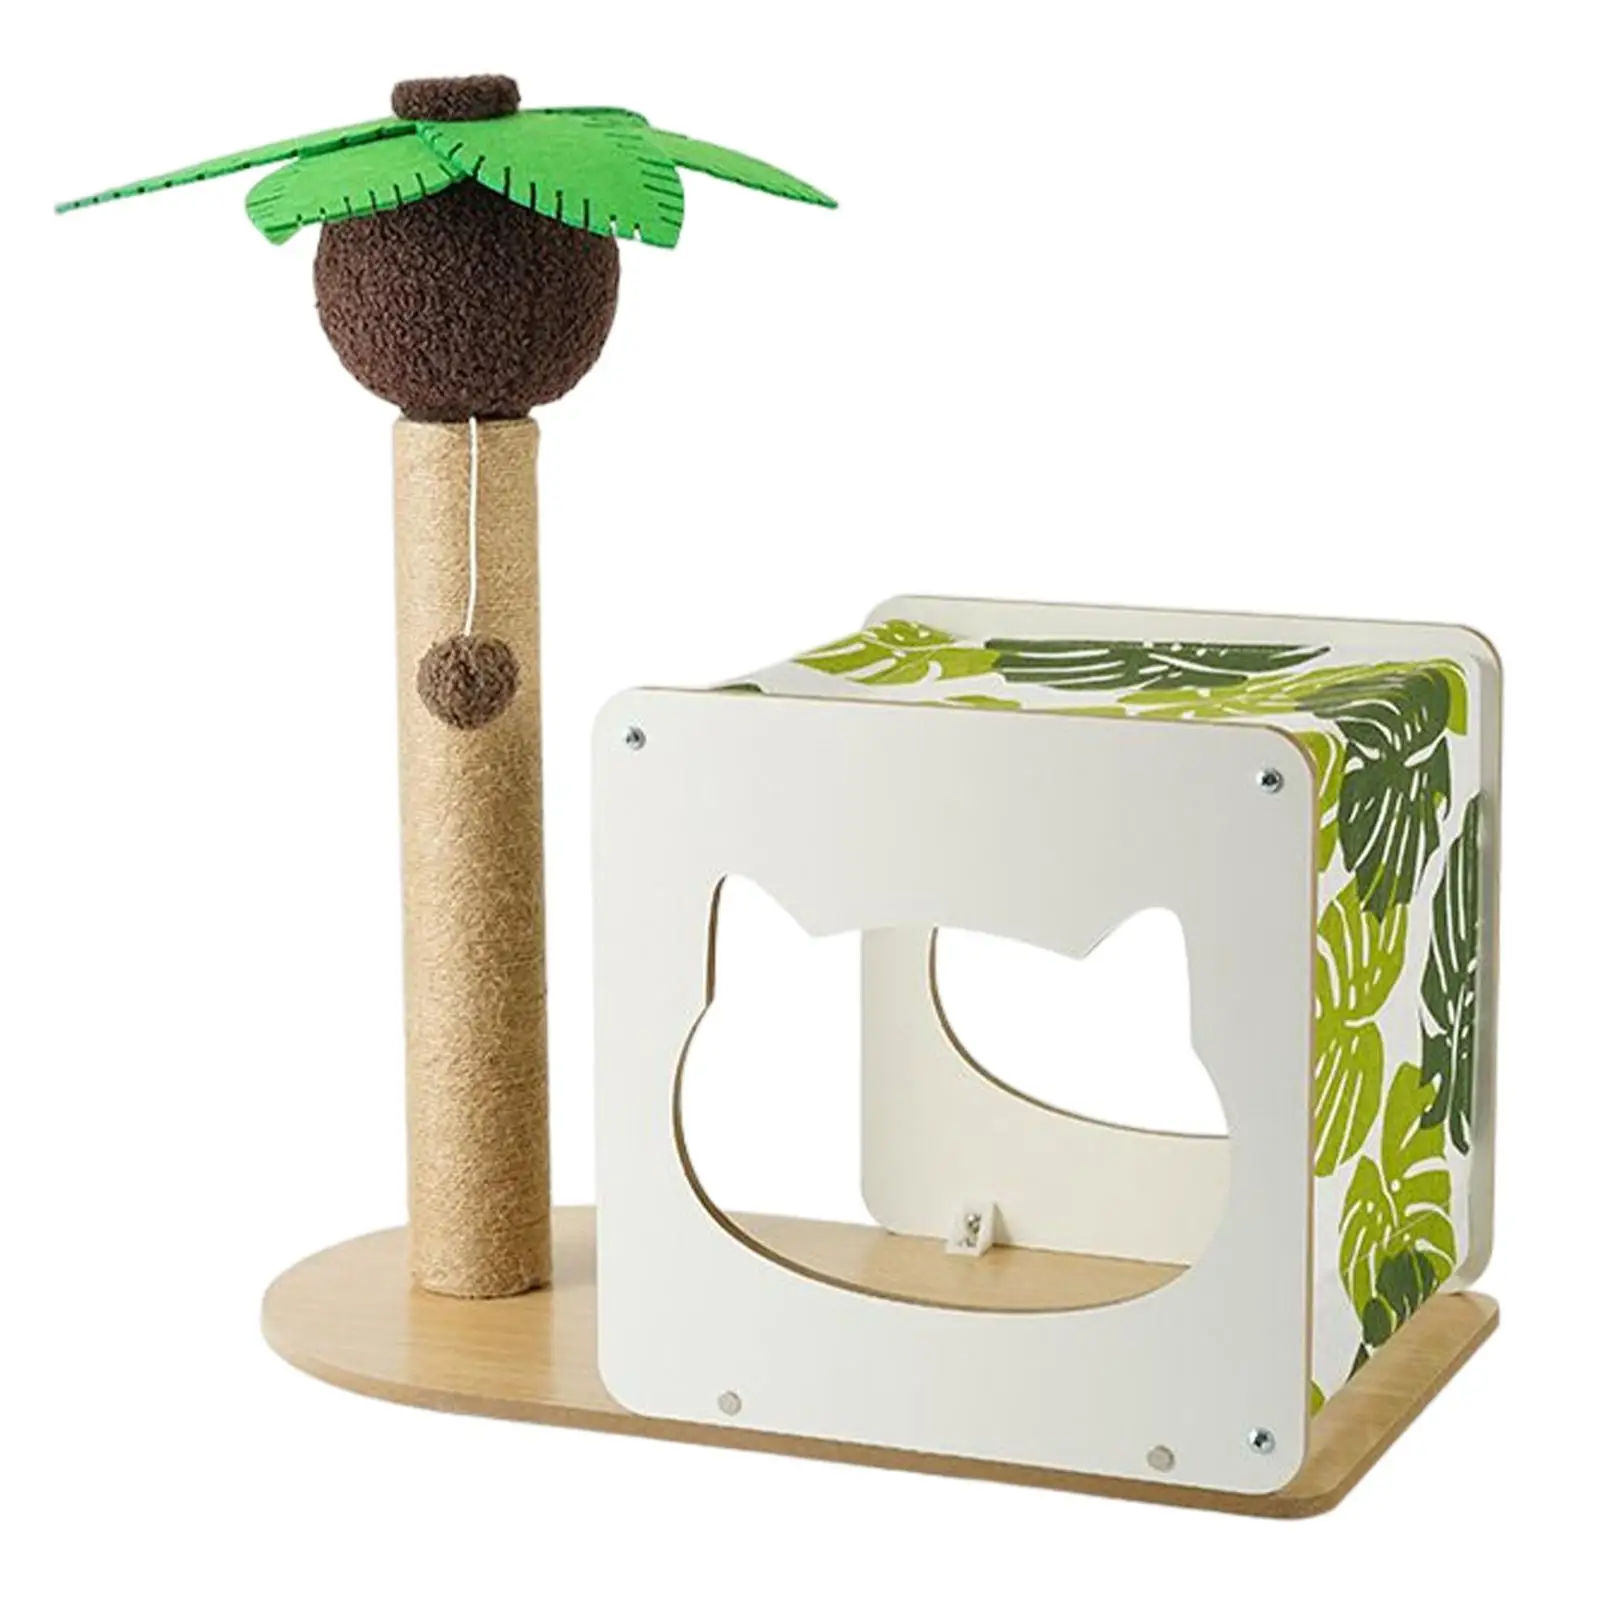 

Scratching Post Animal Sharpen Claw Toy Indoor Playing Cat House Scratcher